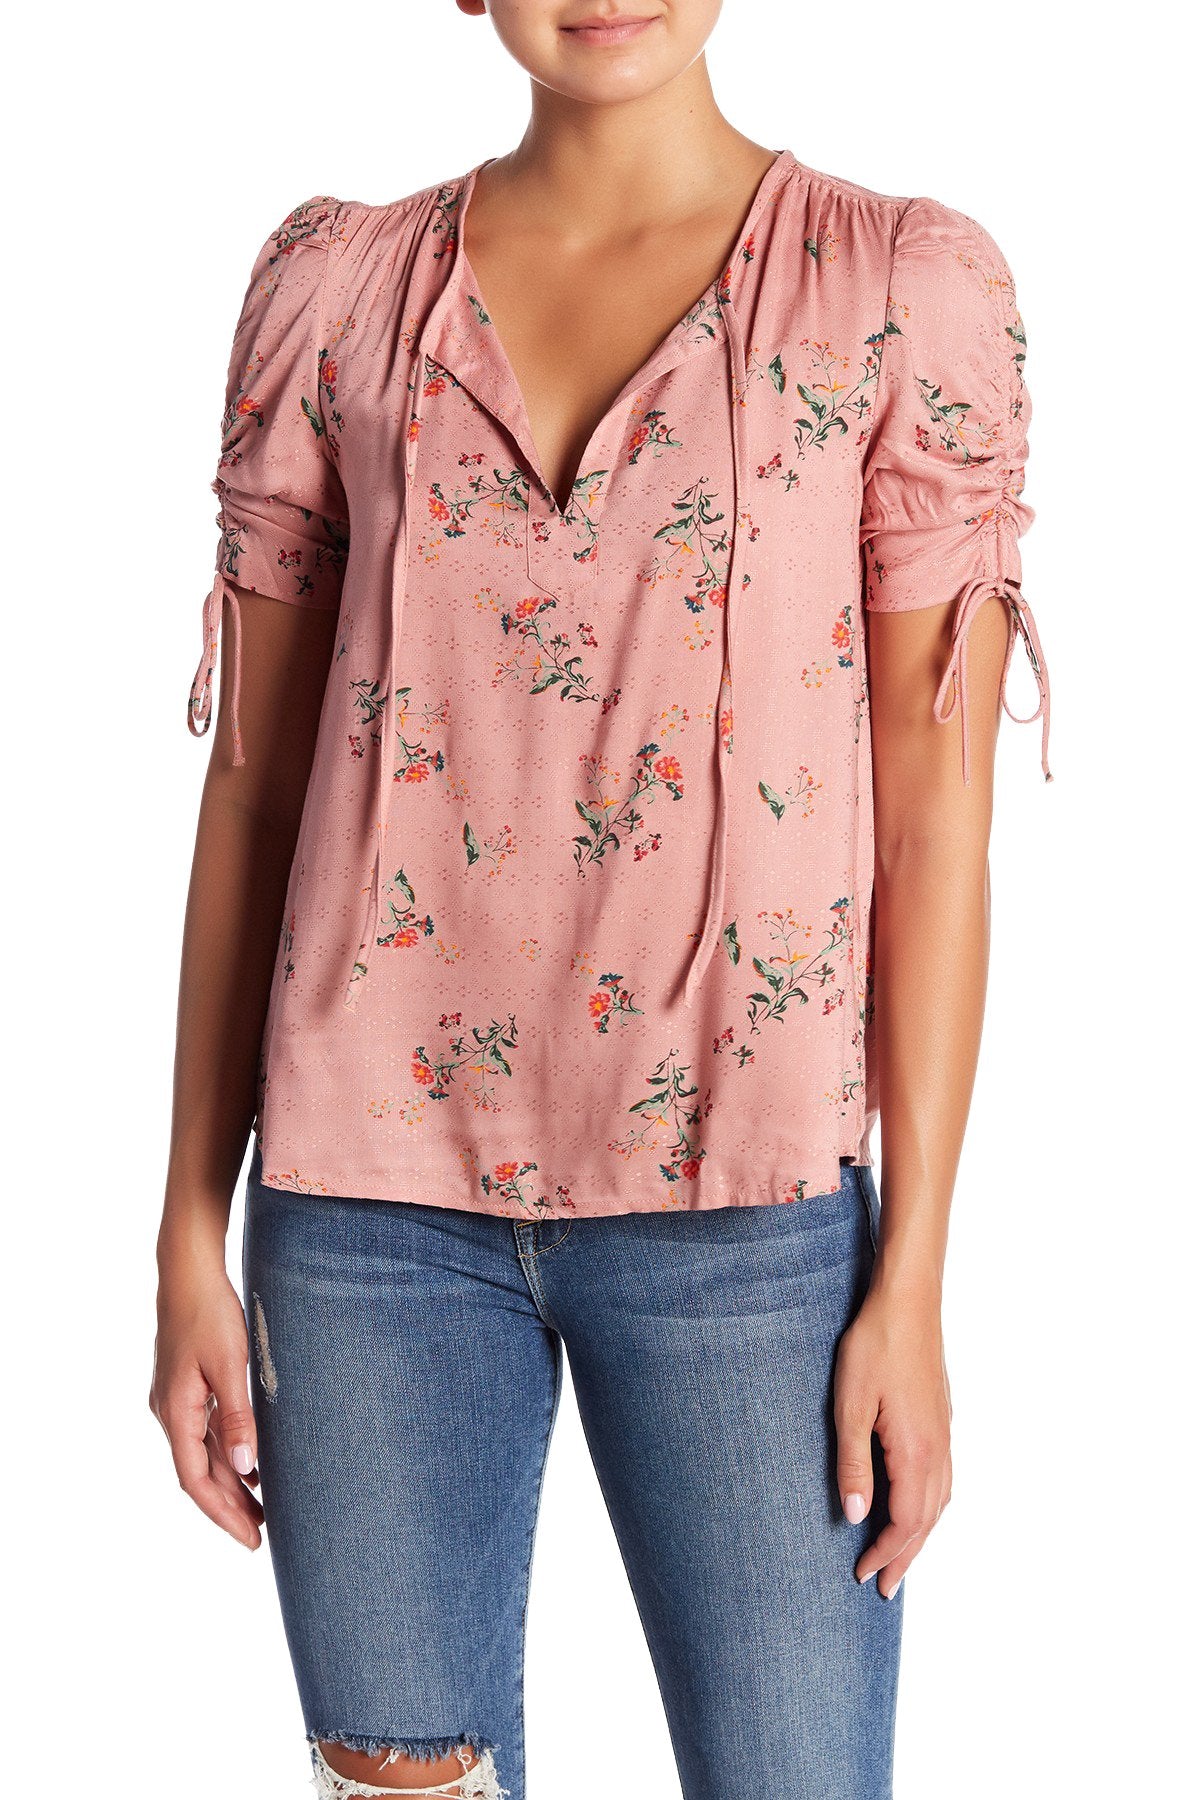 Lucky Brand Pink Puff-Sleeve Printed Top | CheapUndies